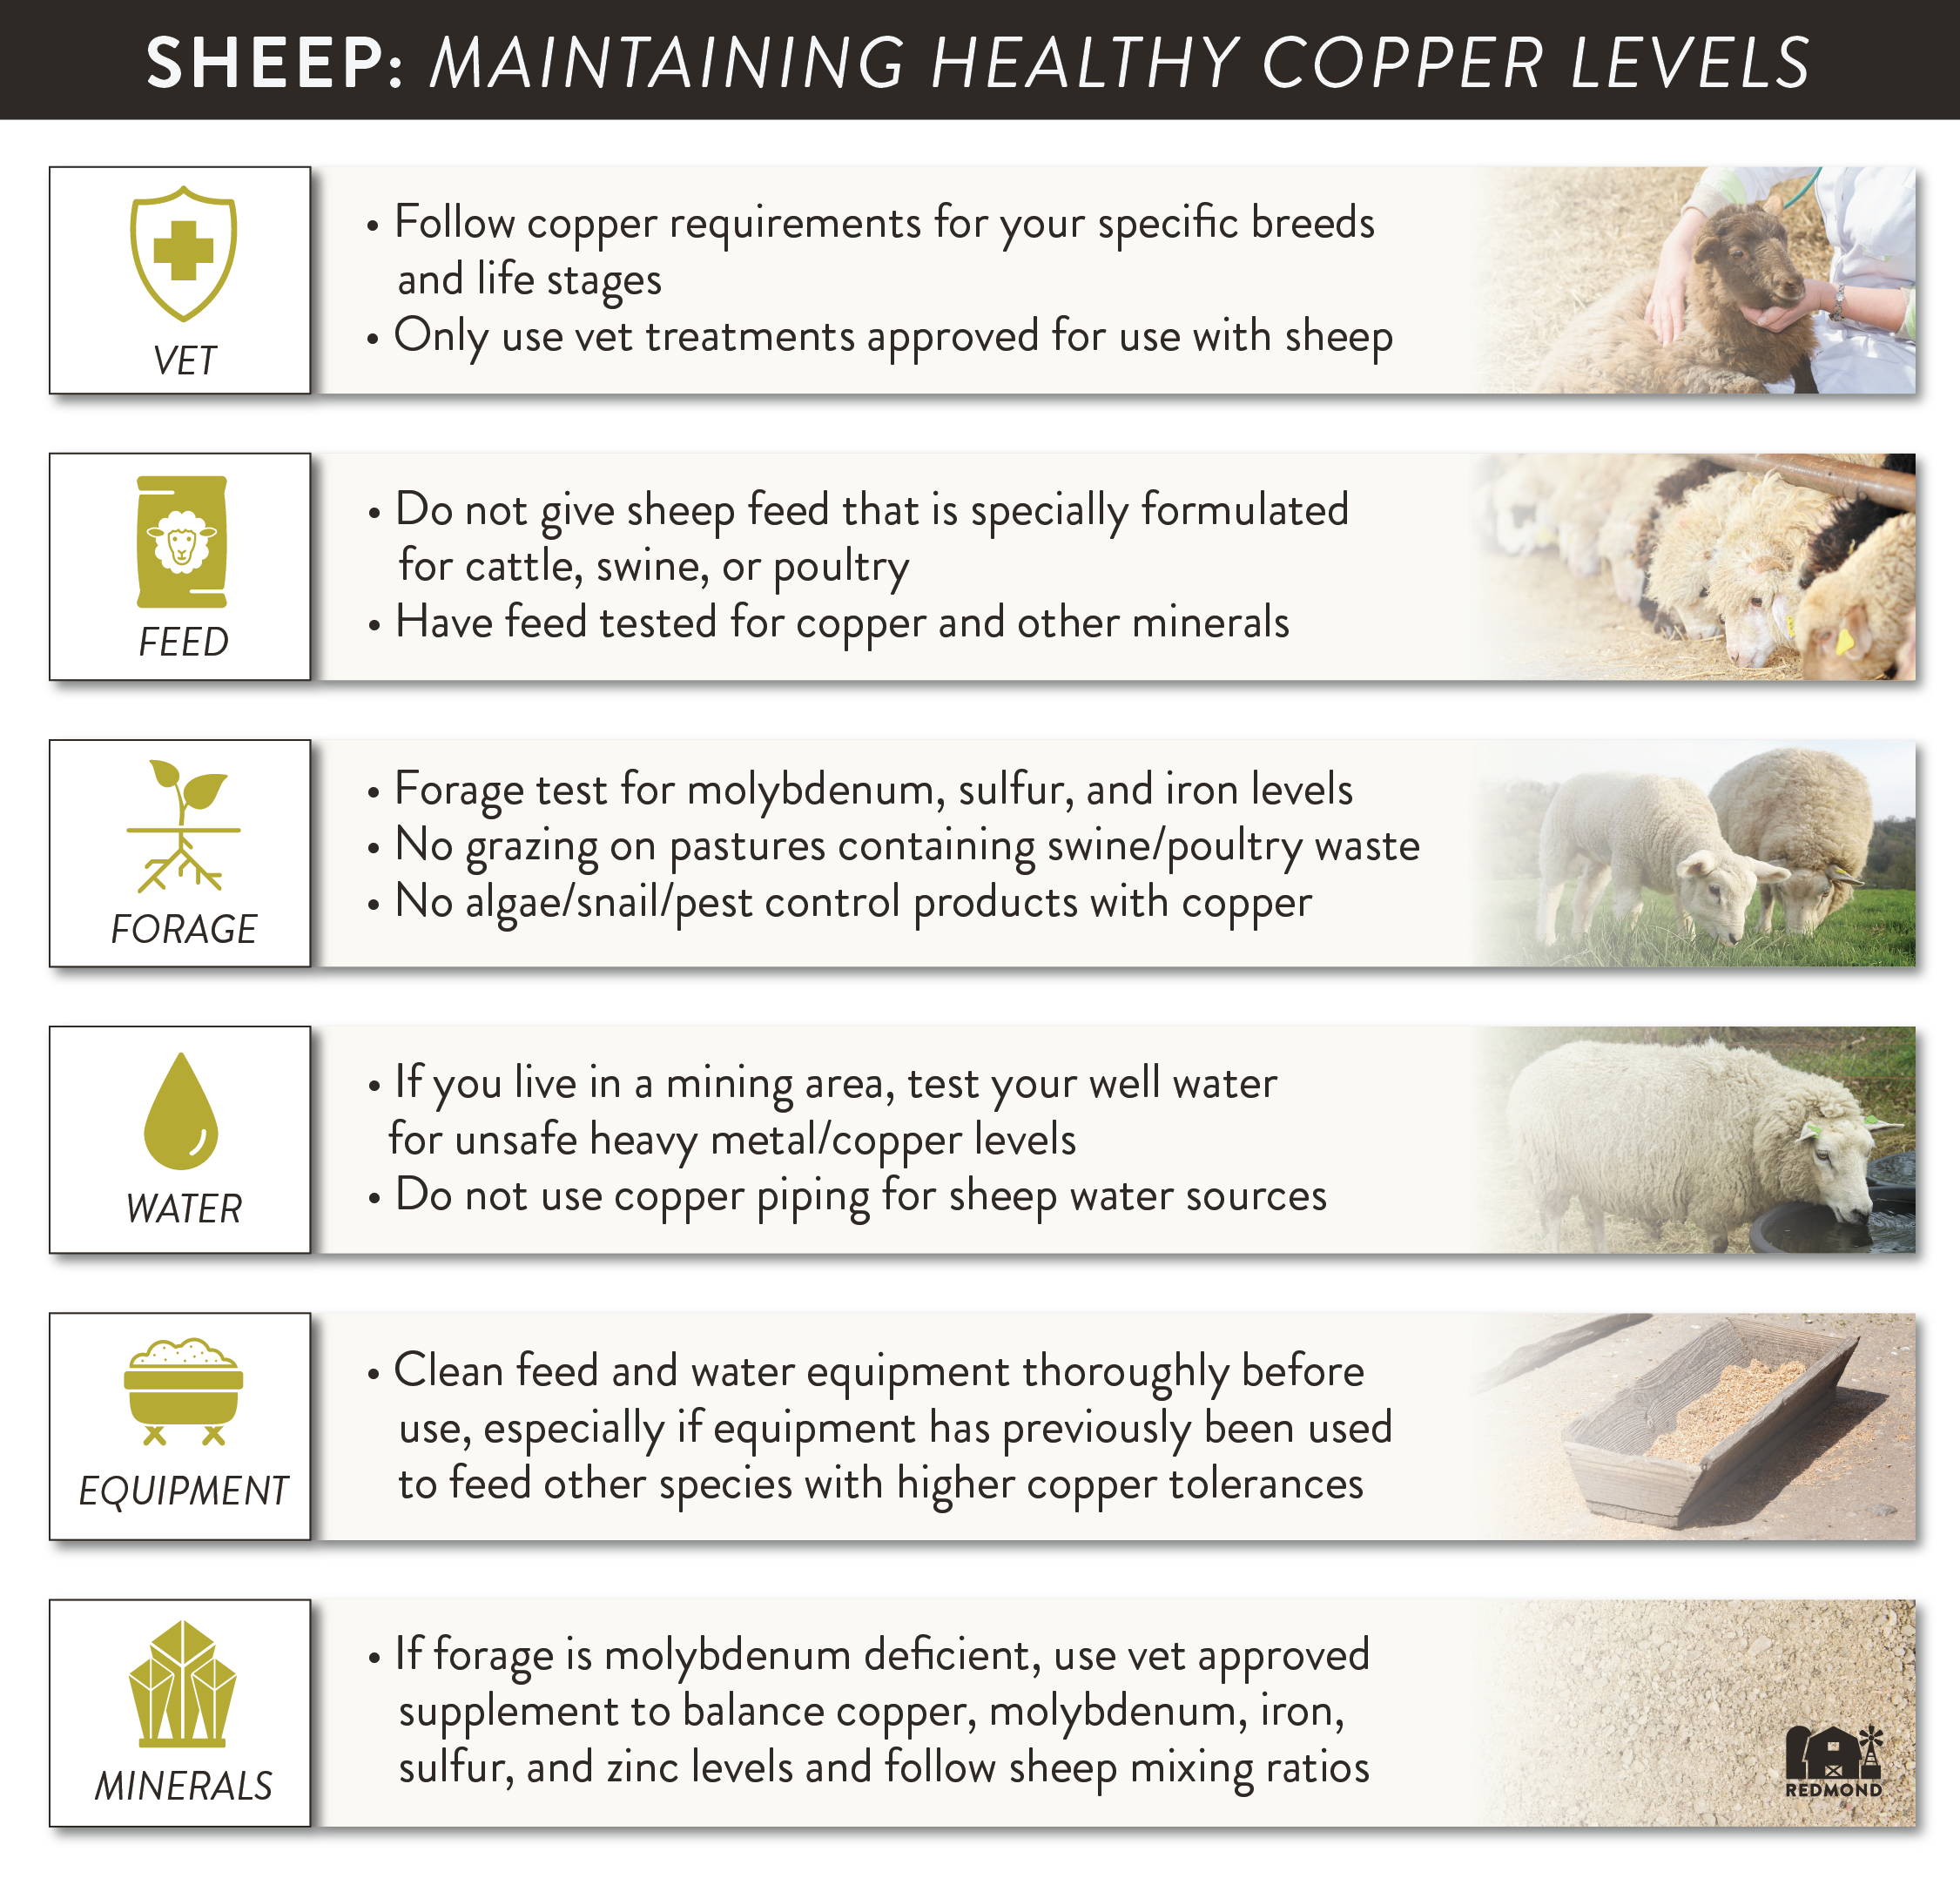 Maintaining safe copper levels in sheep